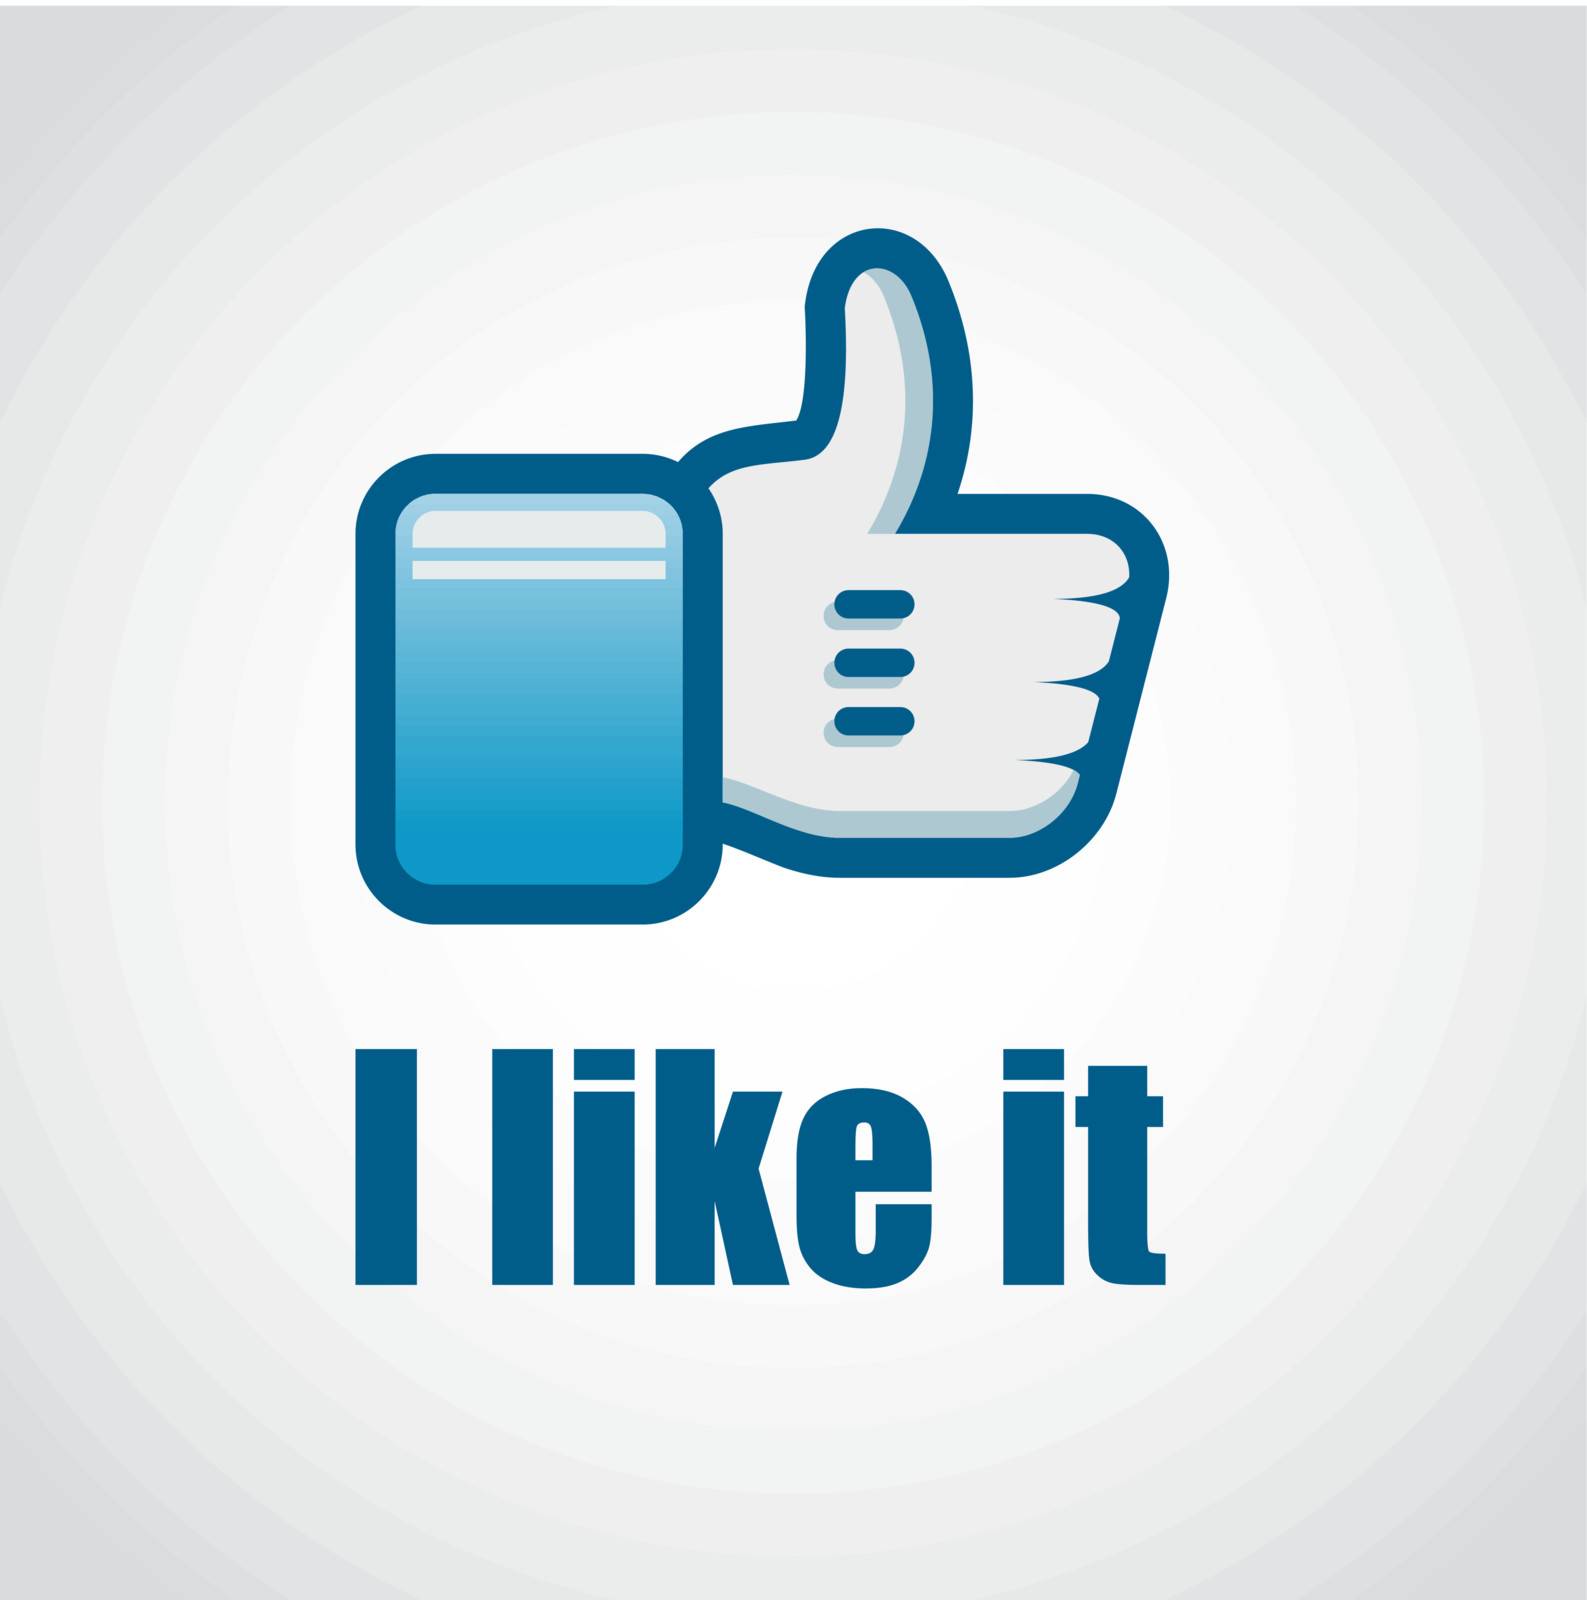 Social Network "like it" hand button with soft blue tones and clean shape. Idea to share or appreciation buttons.